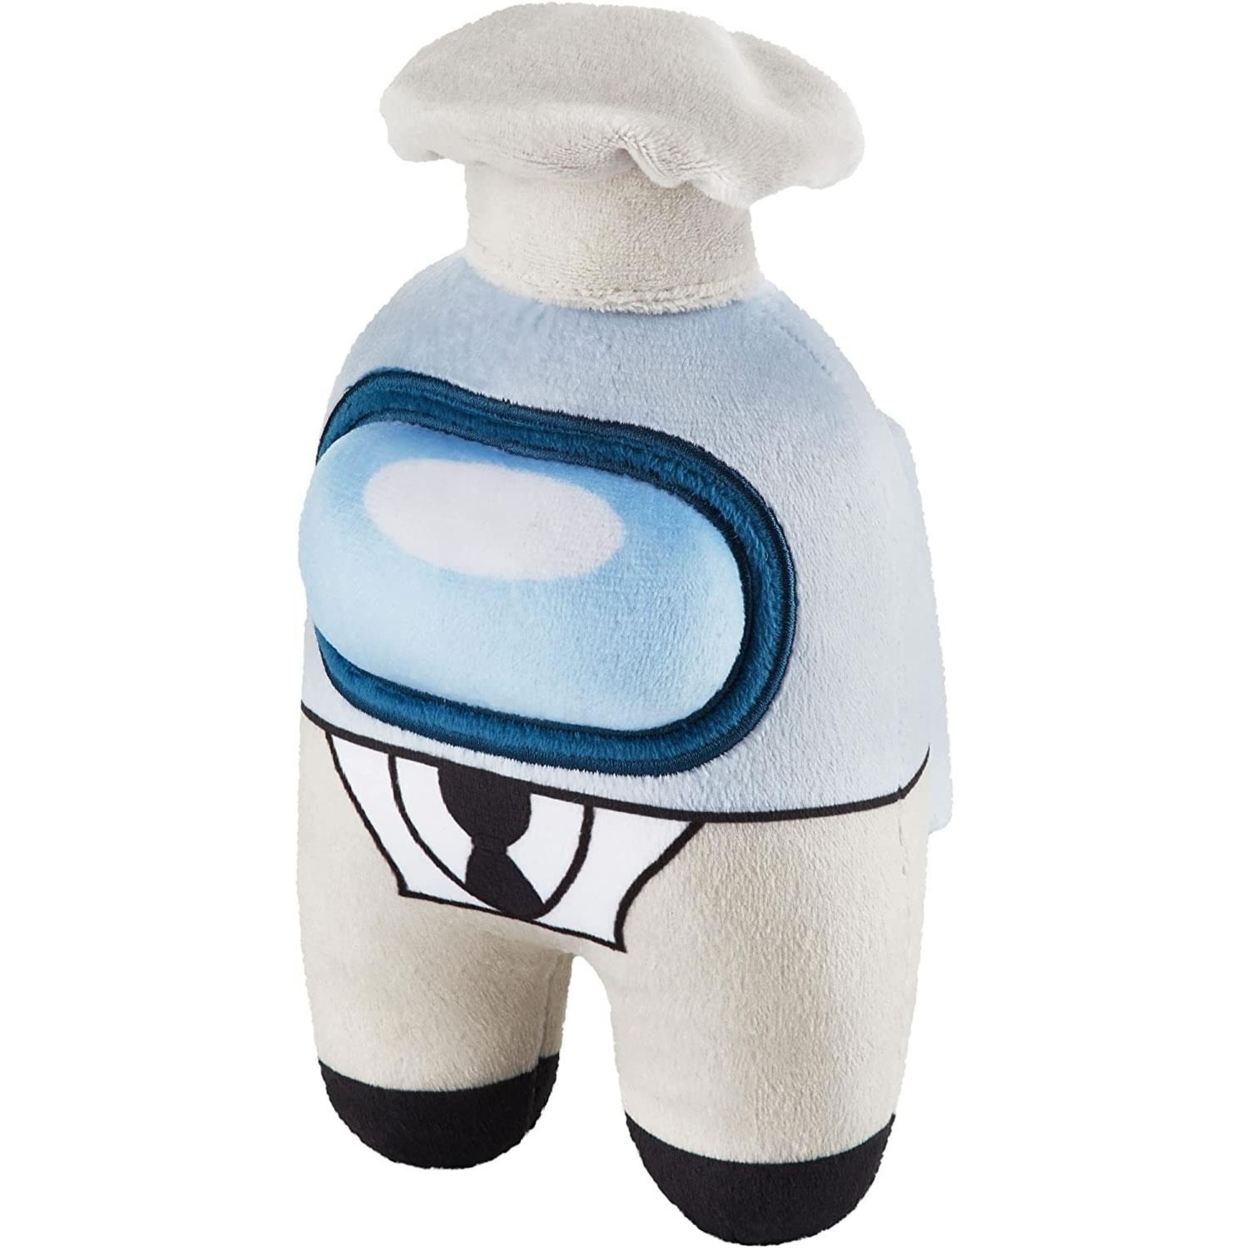 Among Us Plush Buddy White Crewmate The Chef 8 Online Video Game Character P.M.I.